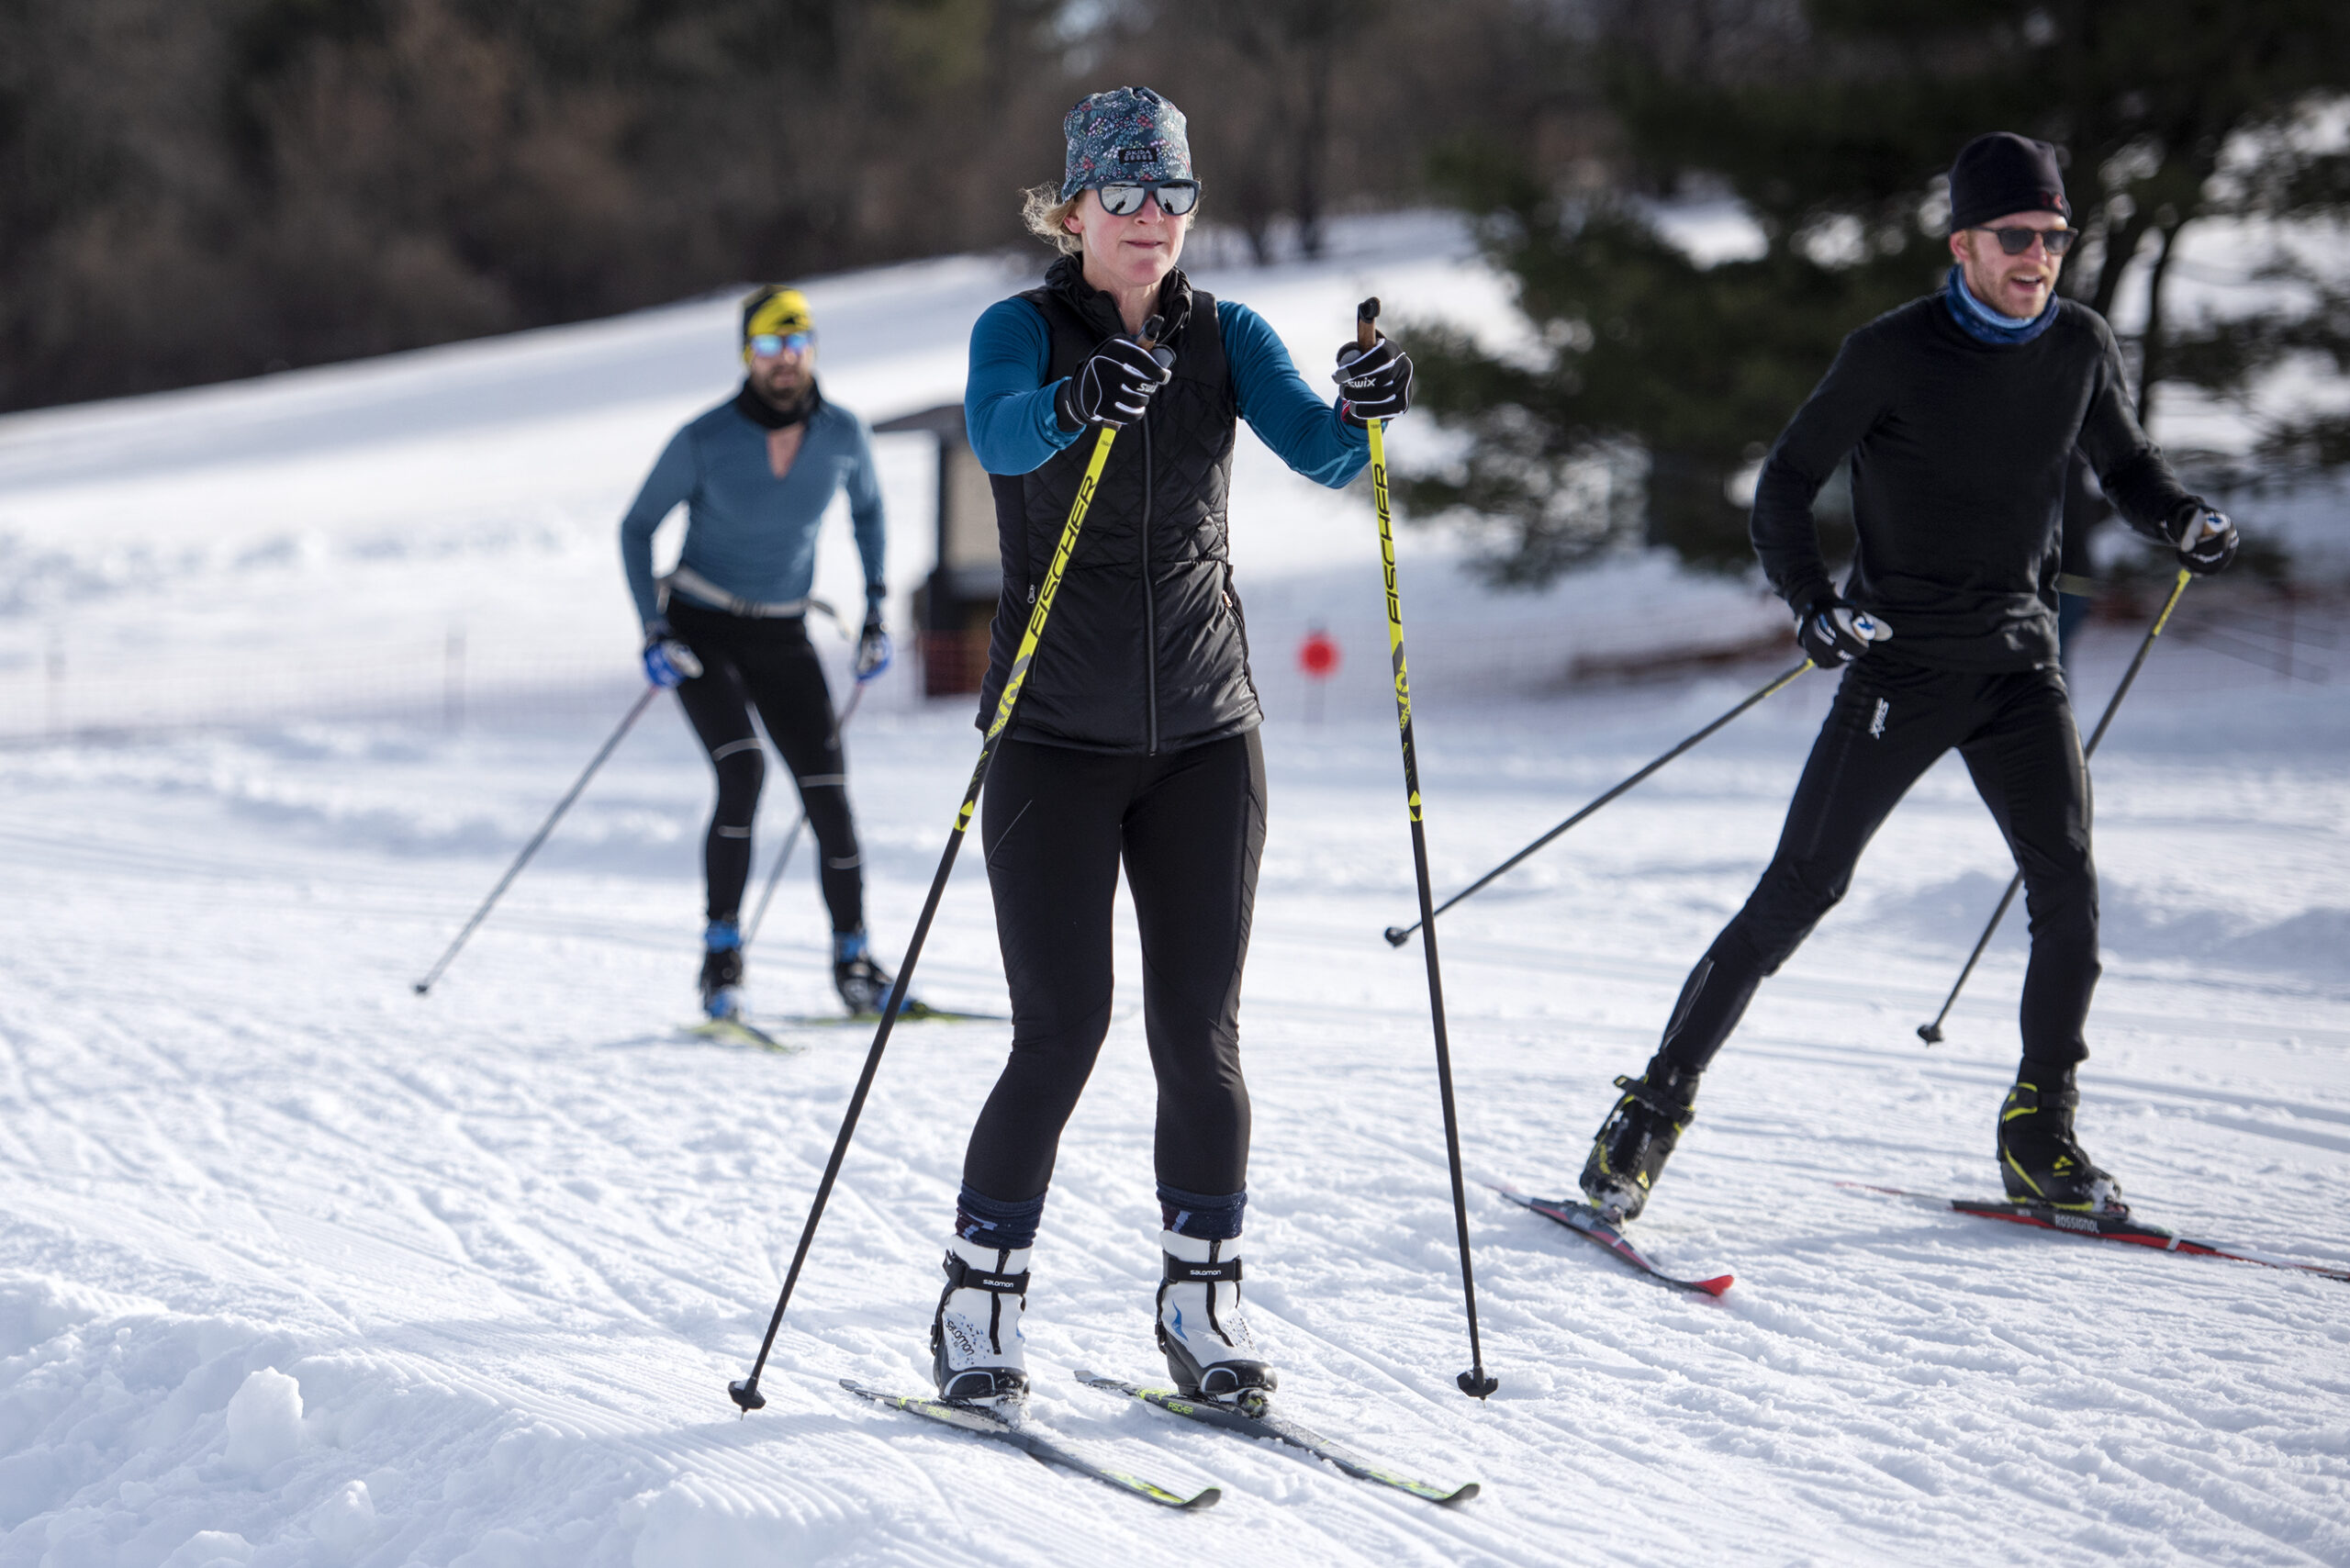 Three people hold poles as they ski